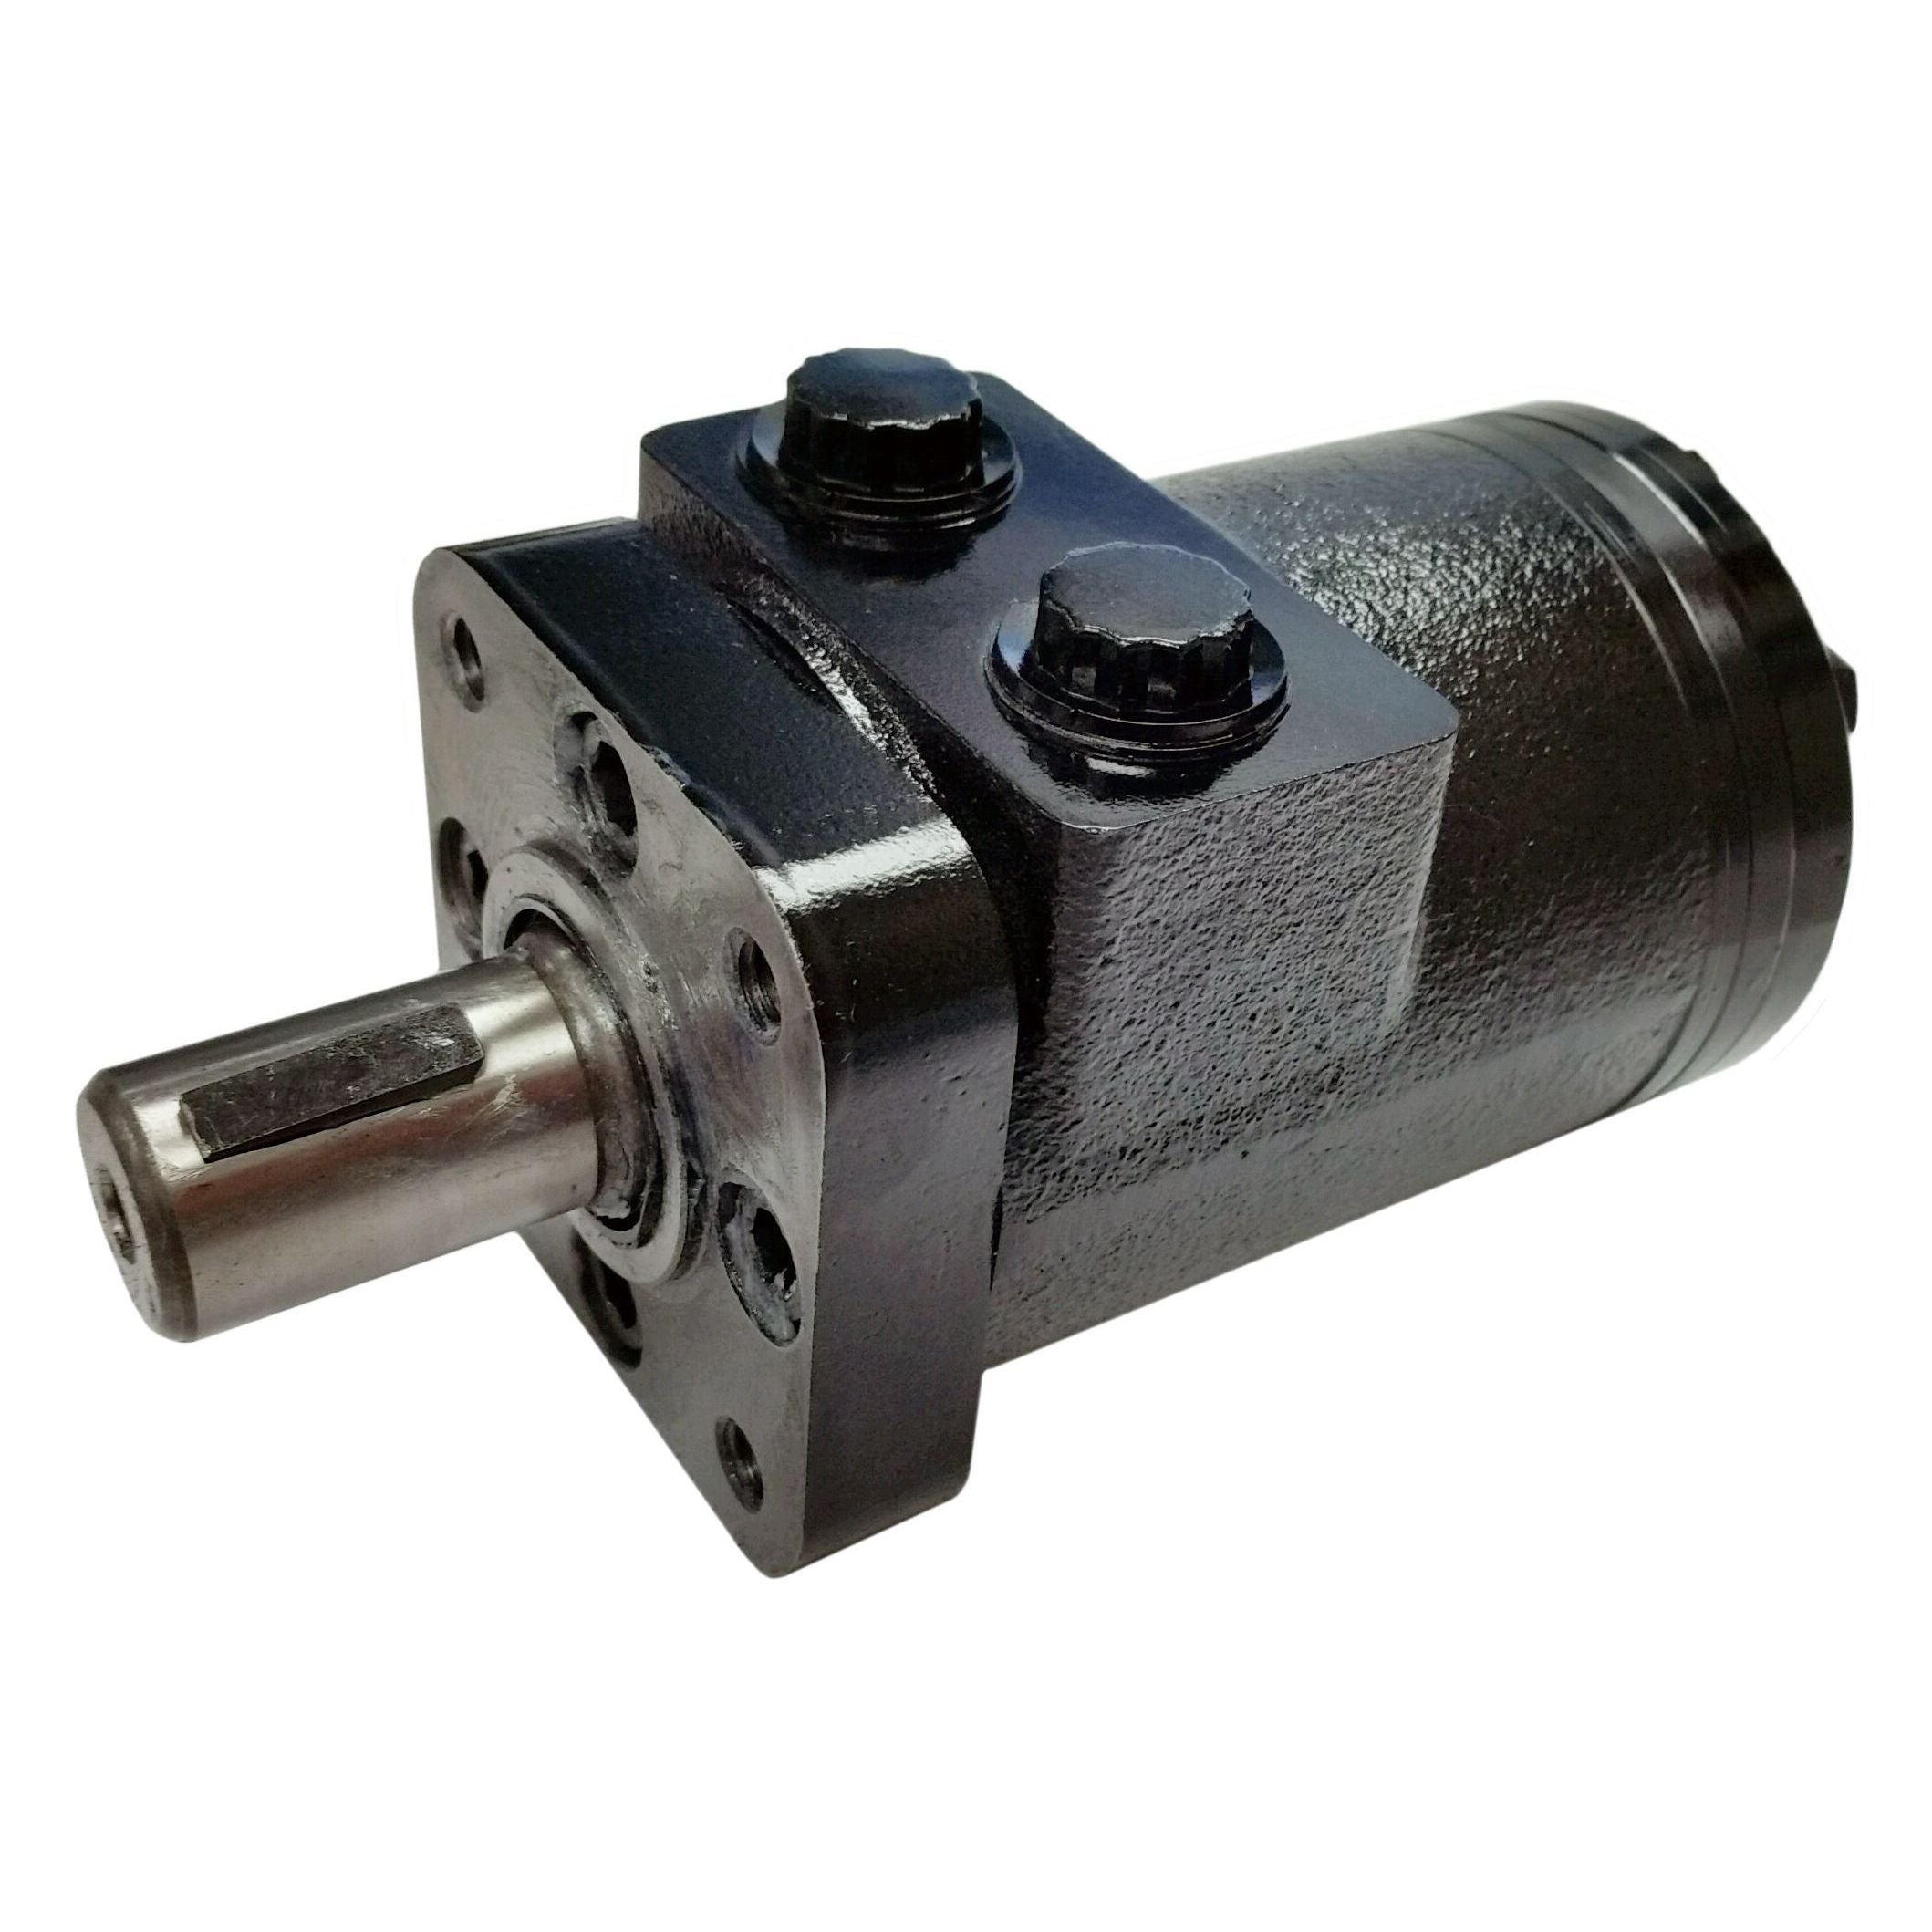 BMPH-125-H4-S-F : Dynamic LSHT Motor, 120cc, 490RPM, 2089in-lb, 2031psi Differential, 15.85GPM, SAE A 4-Bolt Mount, 6-Tooth Shaft, Side Ported, Manifold